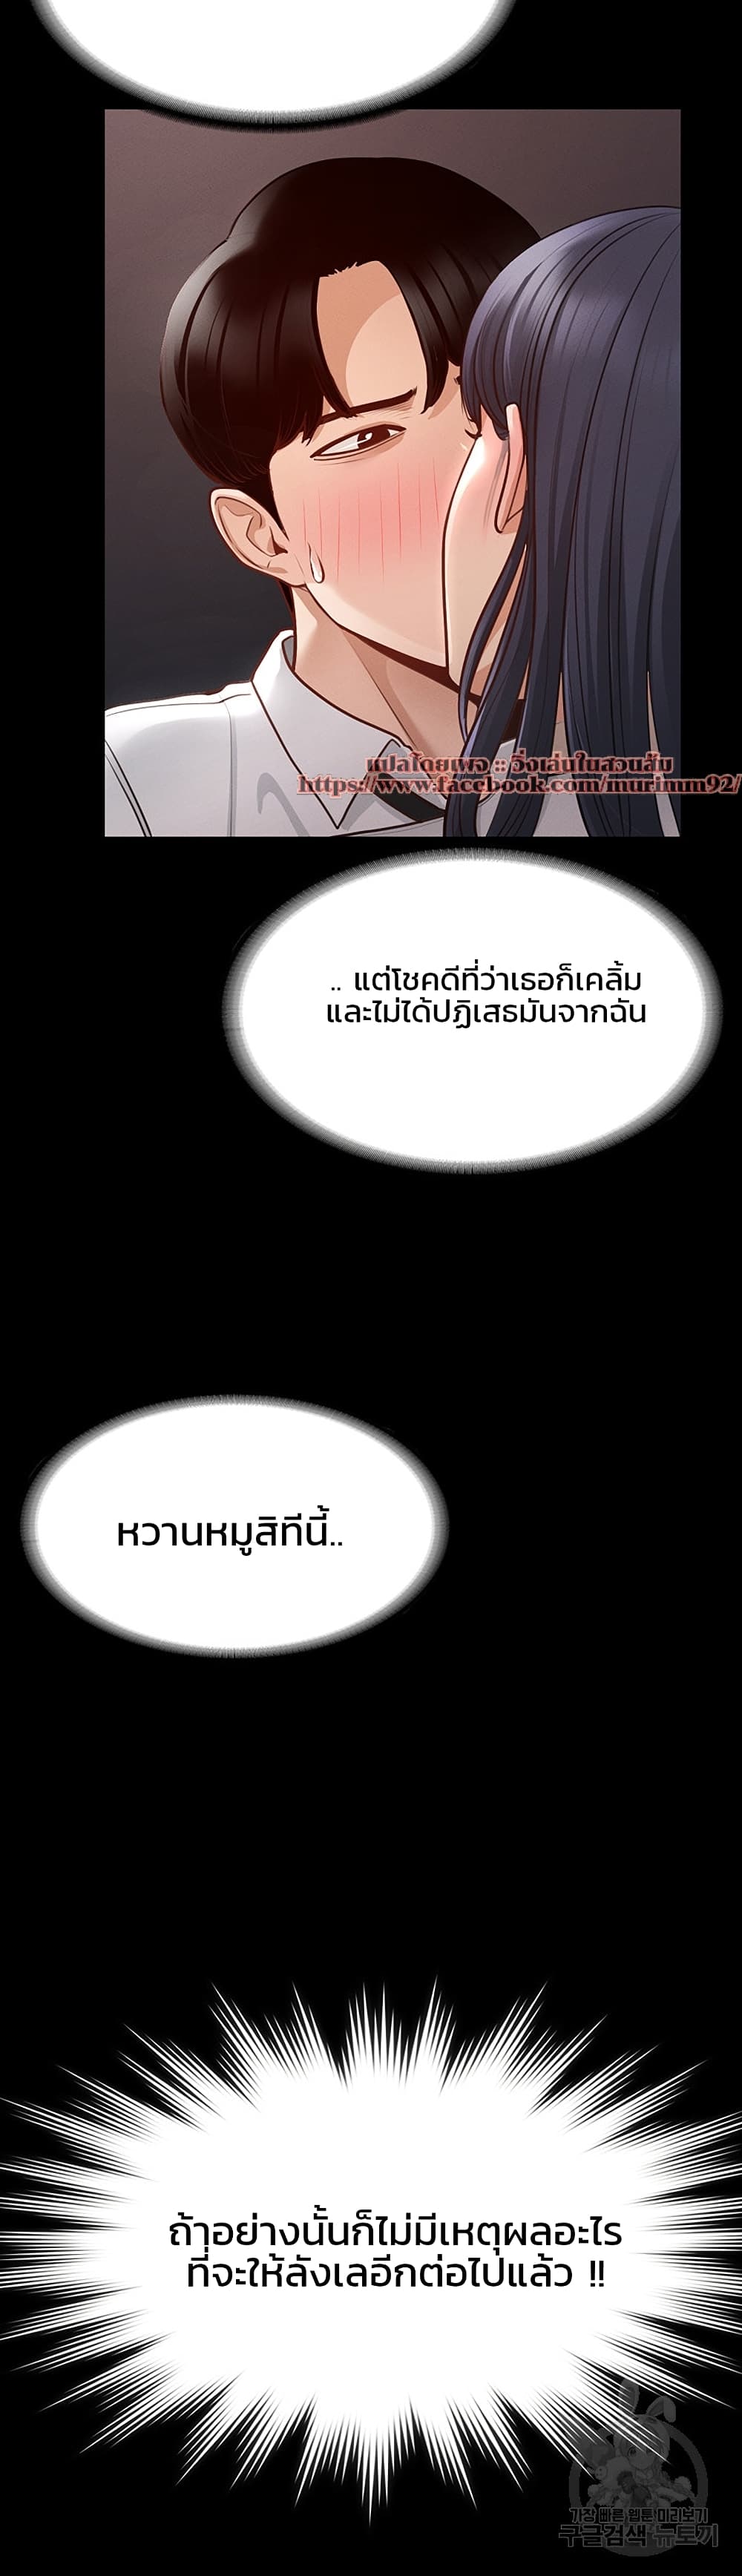 Workplace Manager Privileges ตอนที่ 3 ภาพ 18